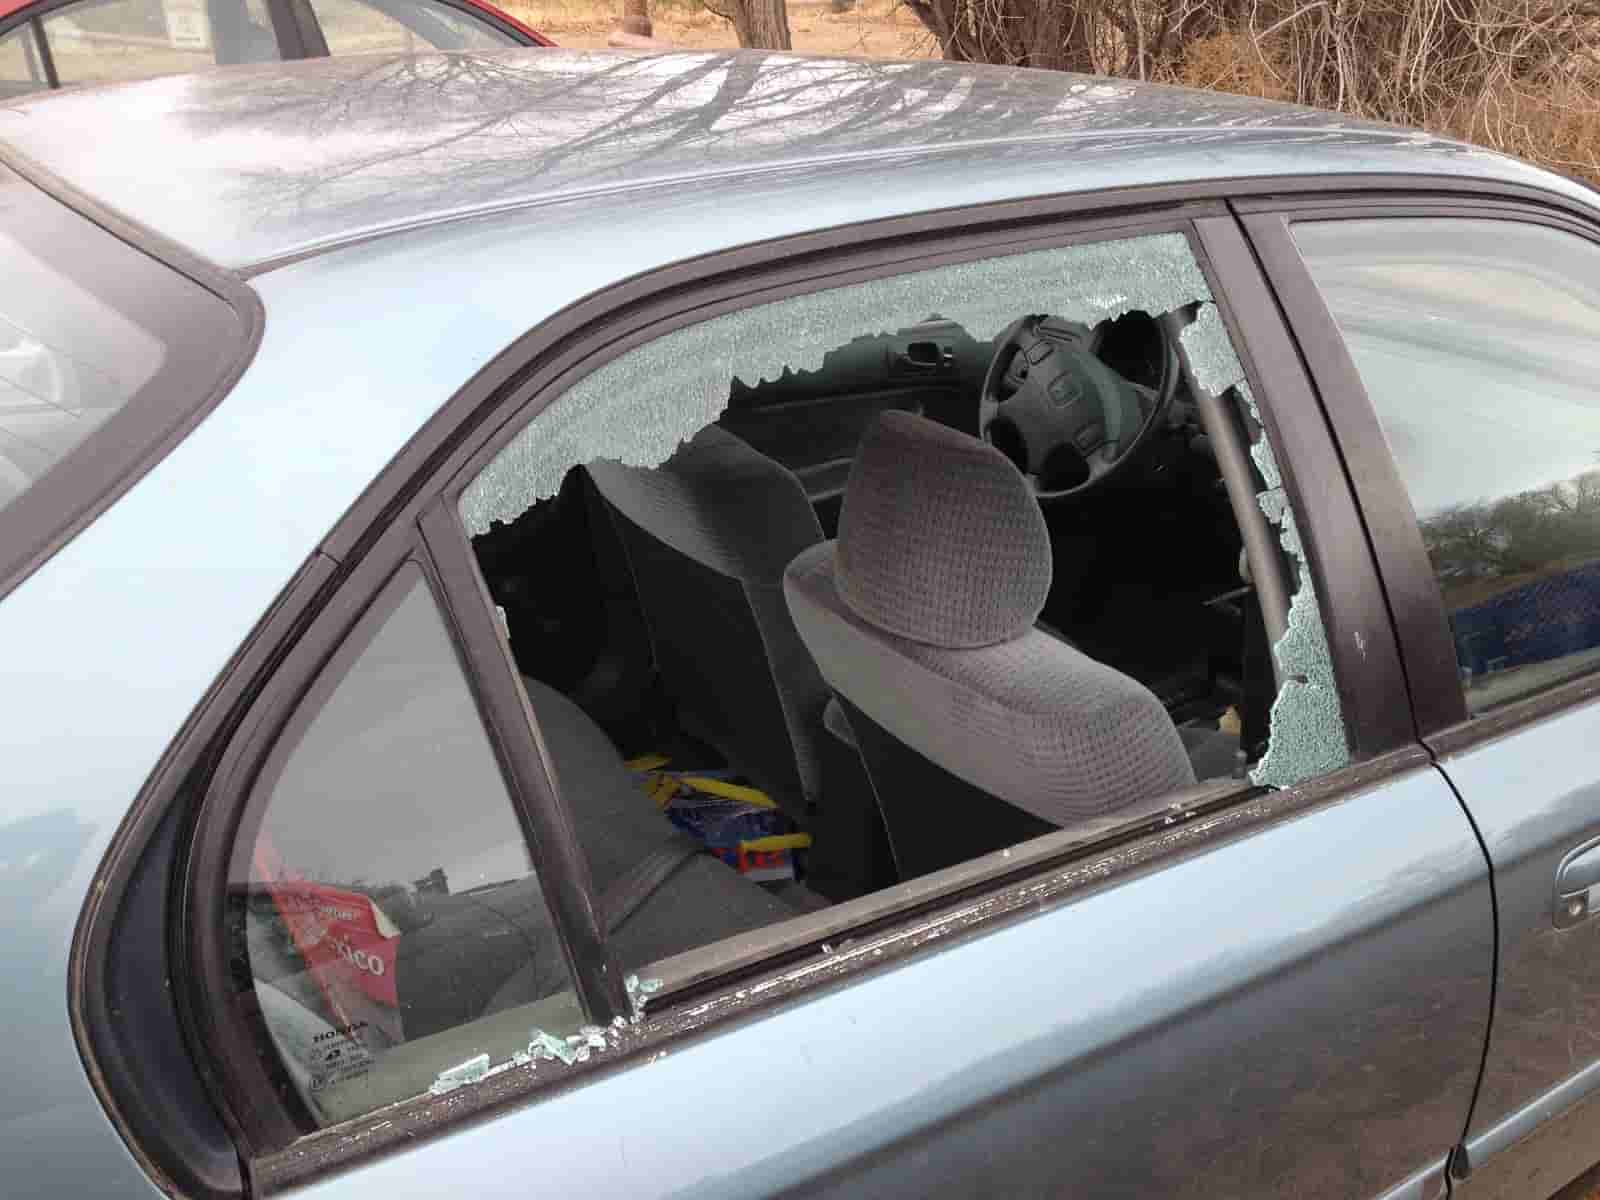 Two Brothers Arrested After Car Burglary, Mother Also Arrested 